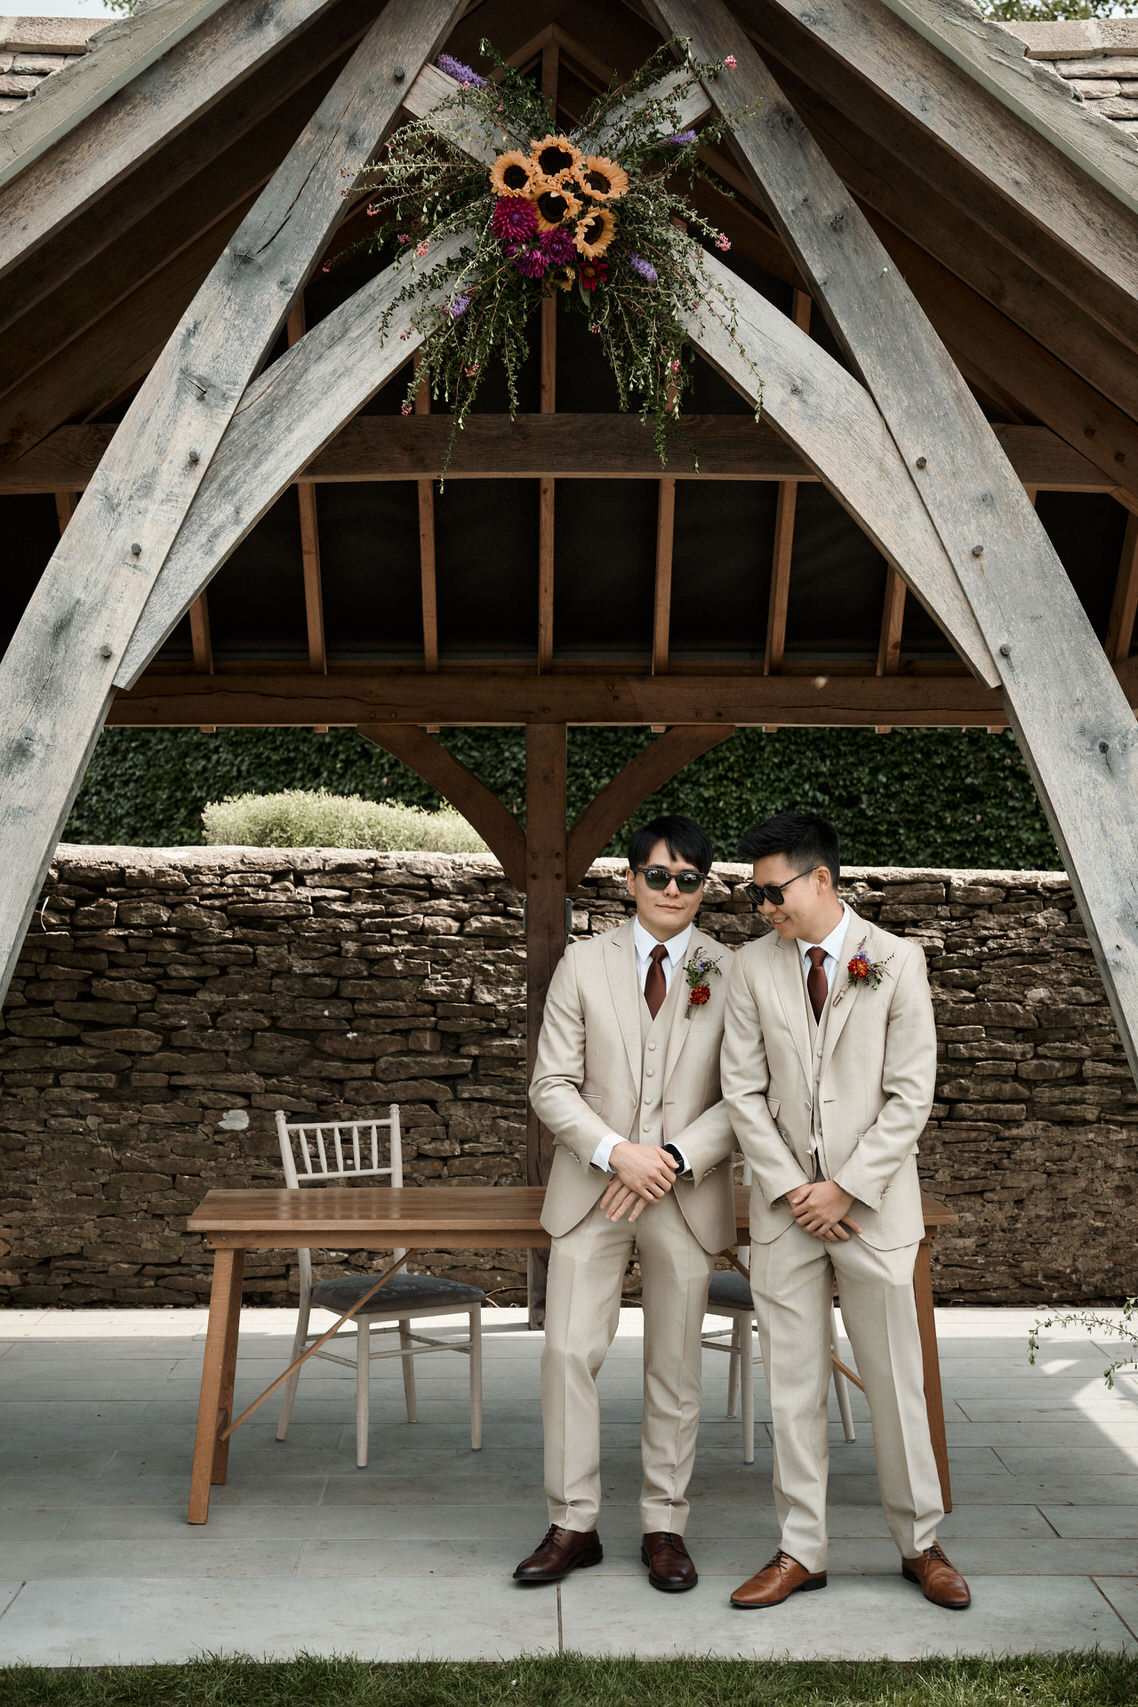 Two guys dressed in suits are standing in front of a wooden pavilion.